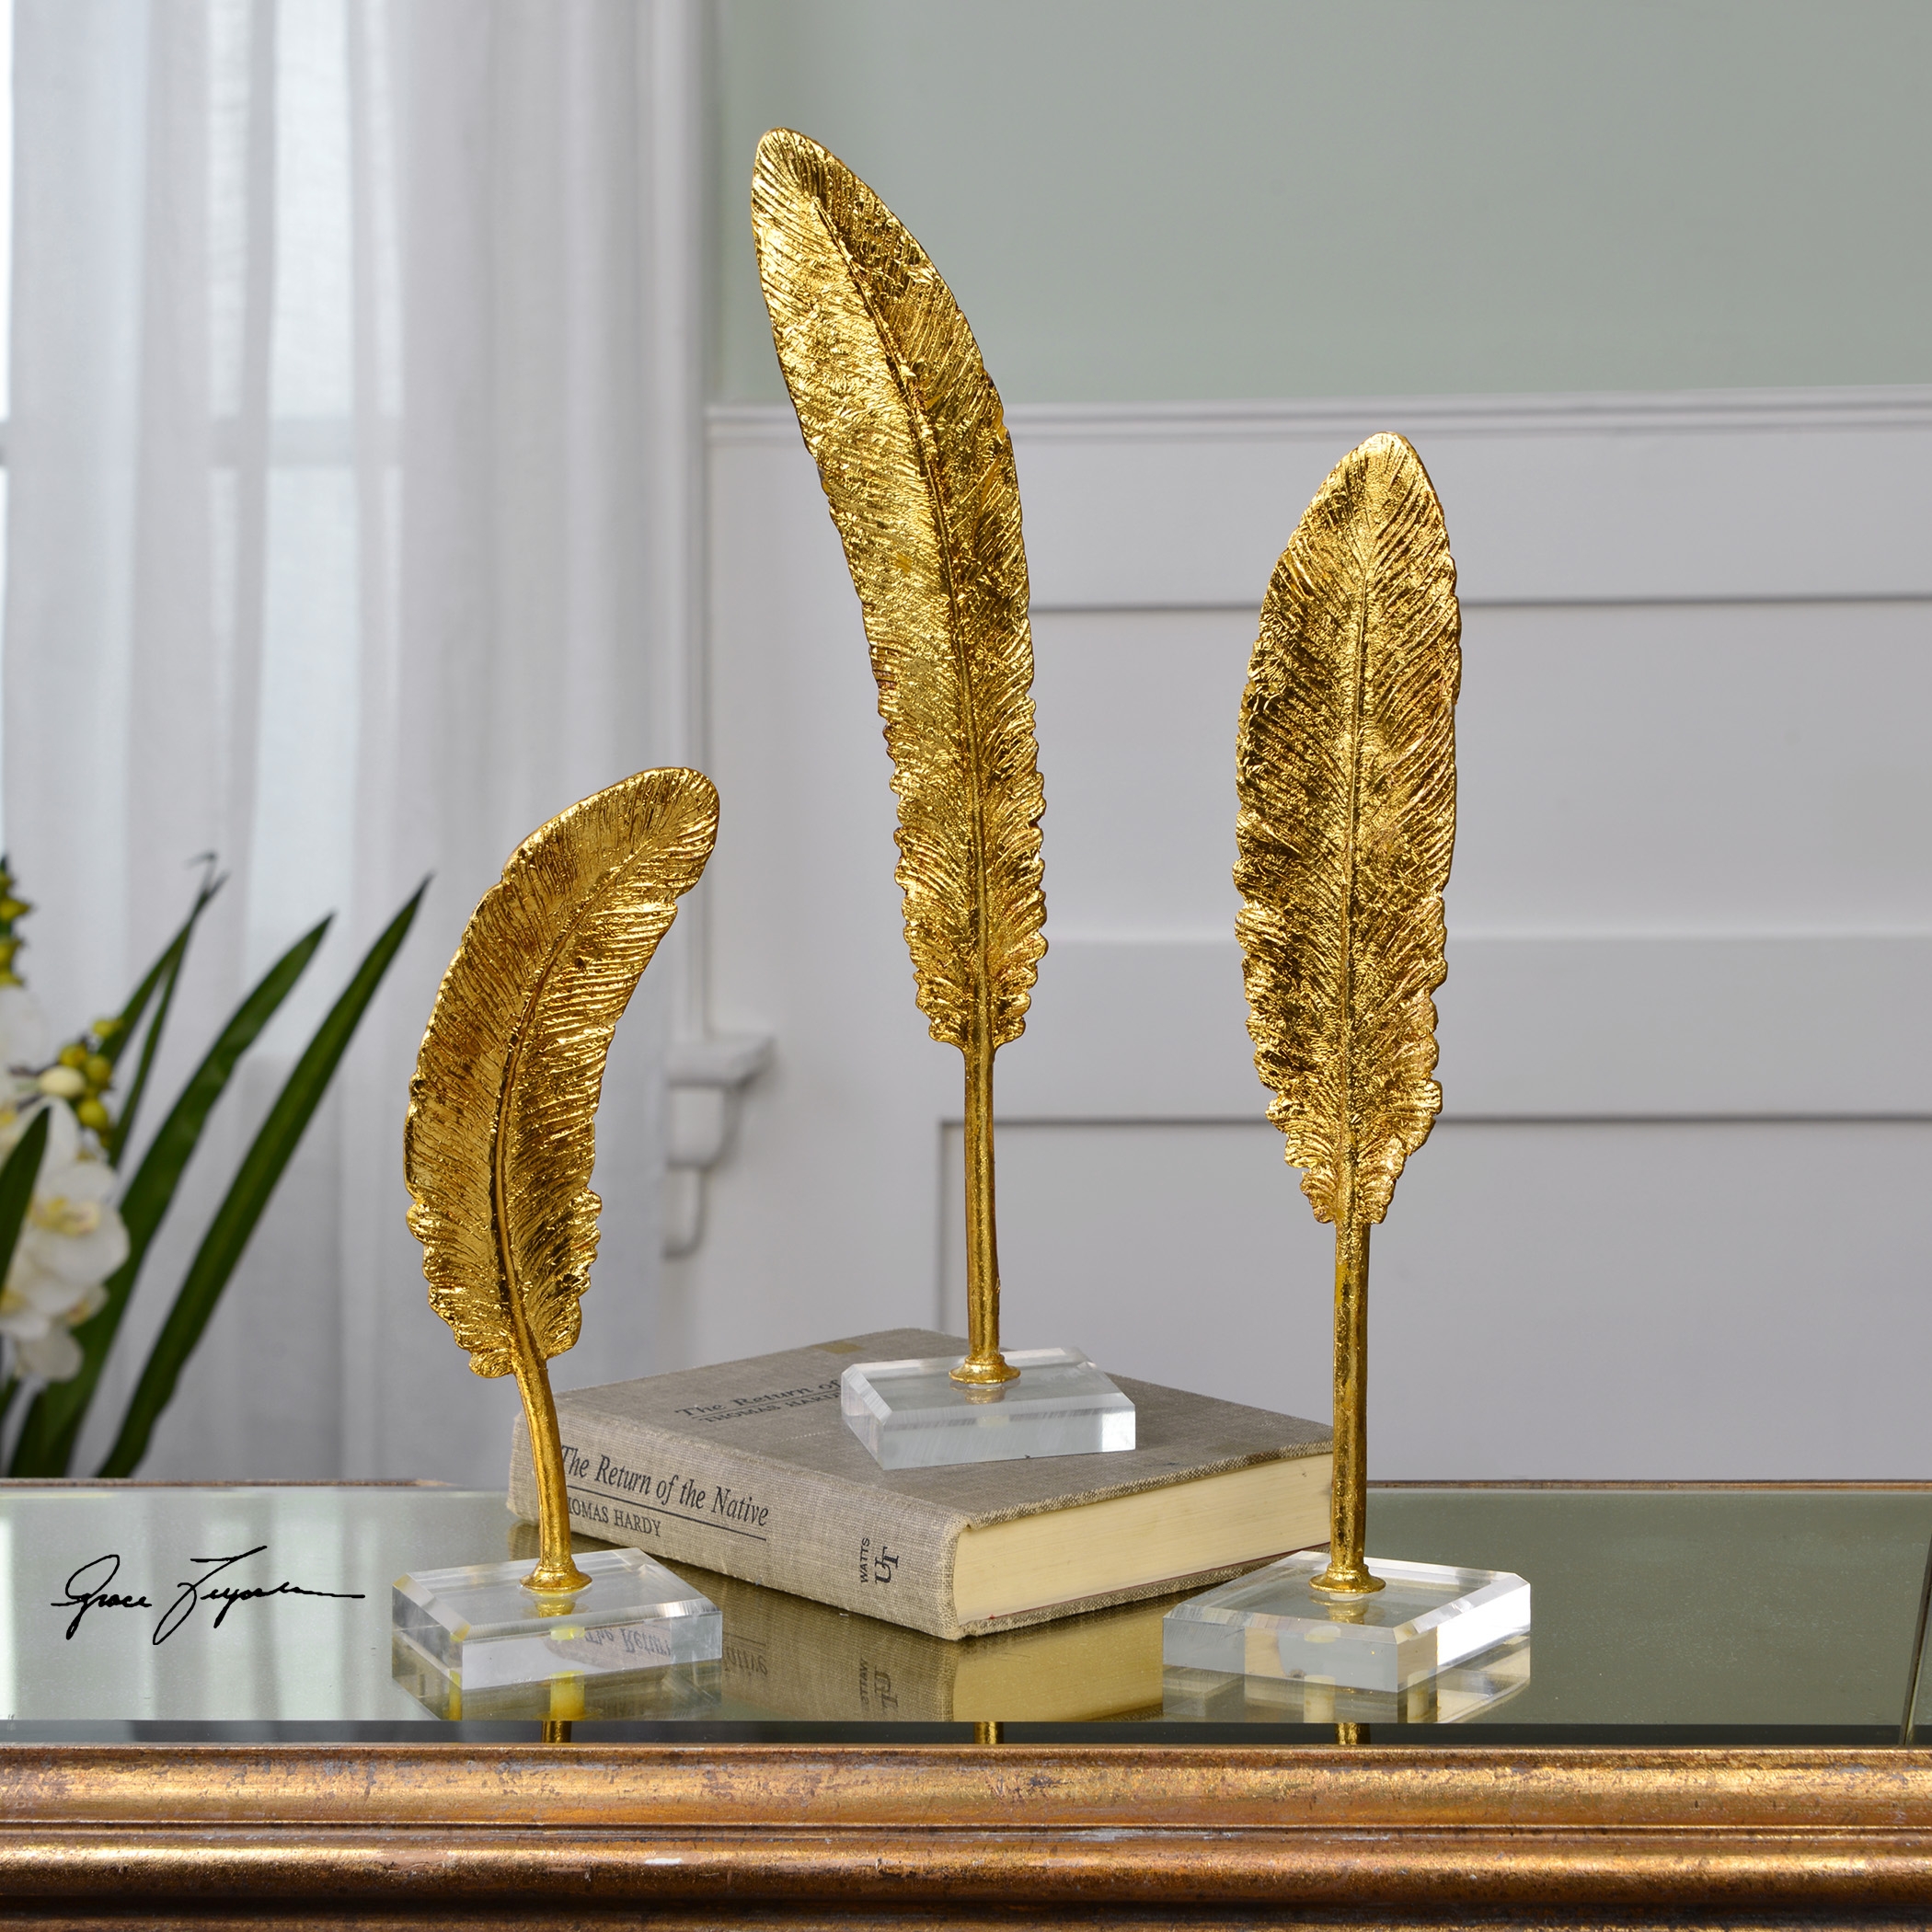 Feathers Gold Sculpture S/3 - Image 1